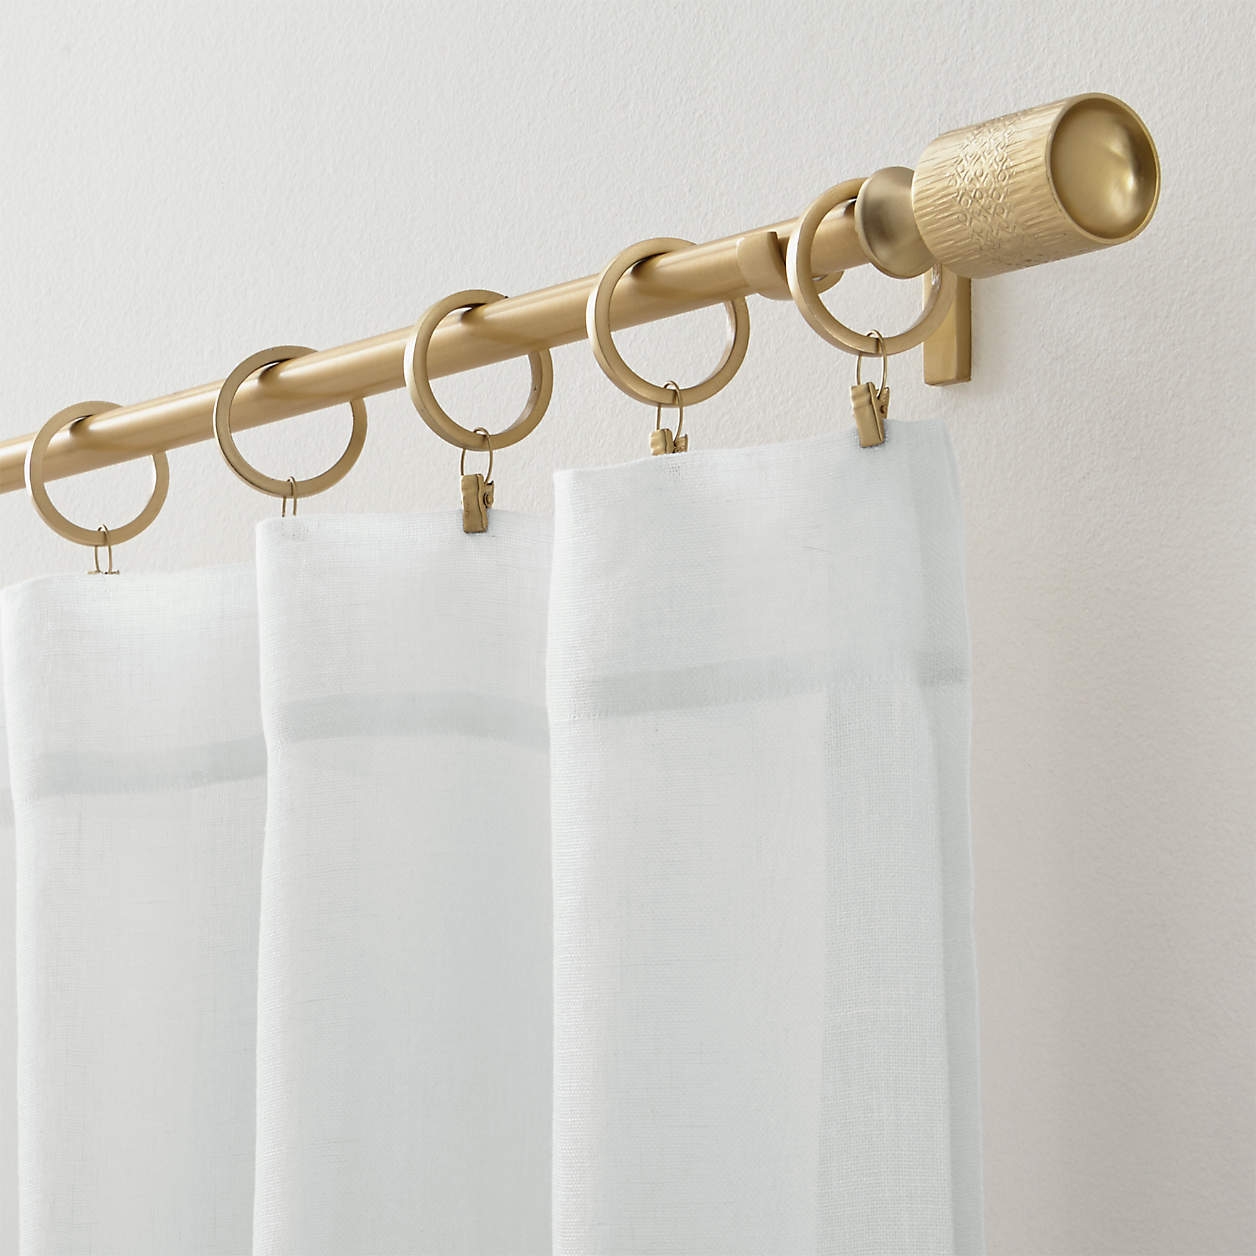 Linen Sheer Curtains, White, 52" x 96" - Image 2